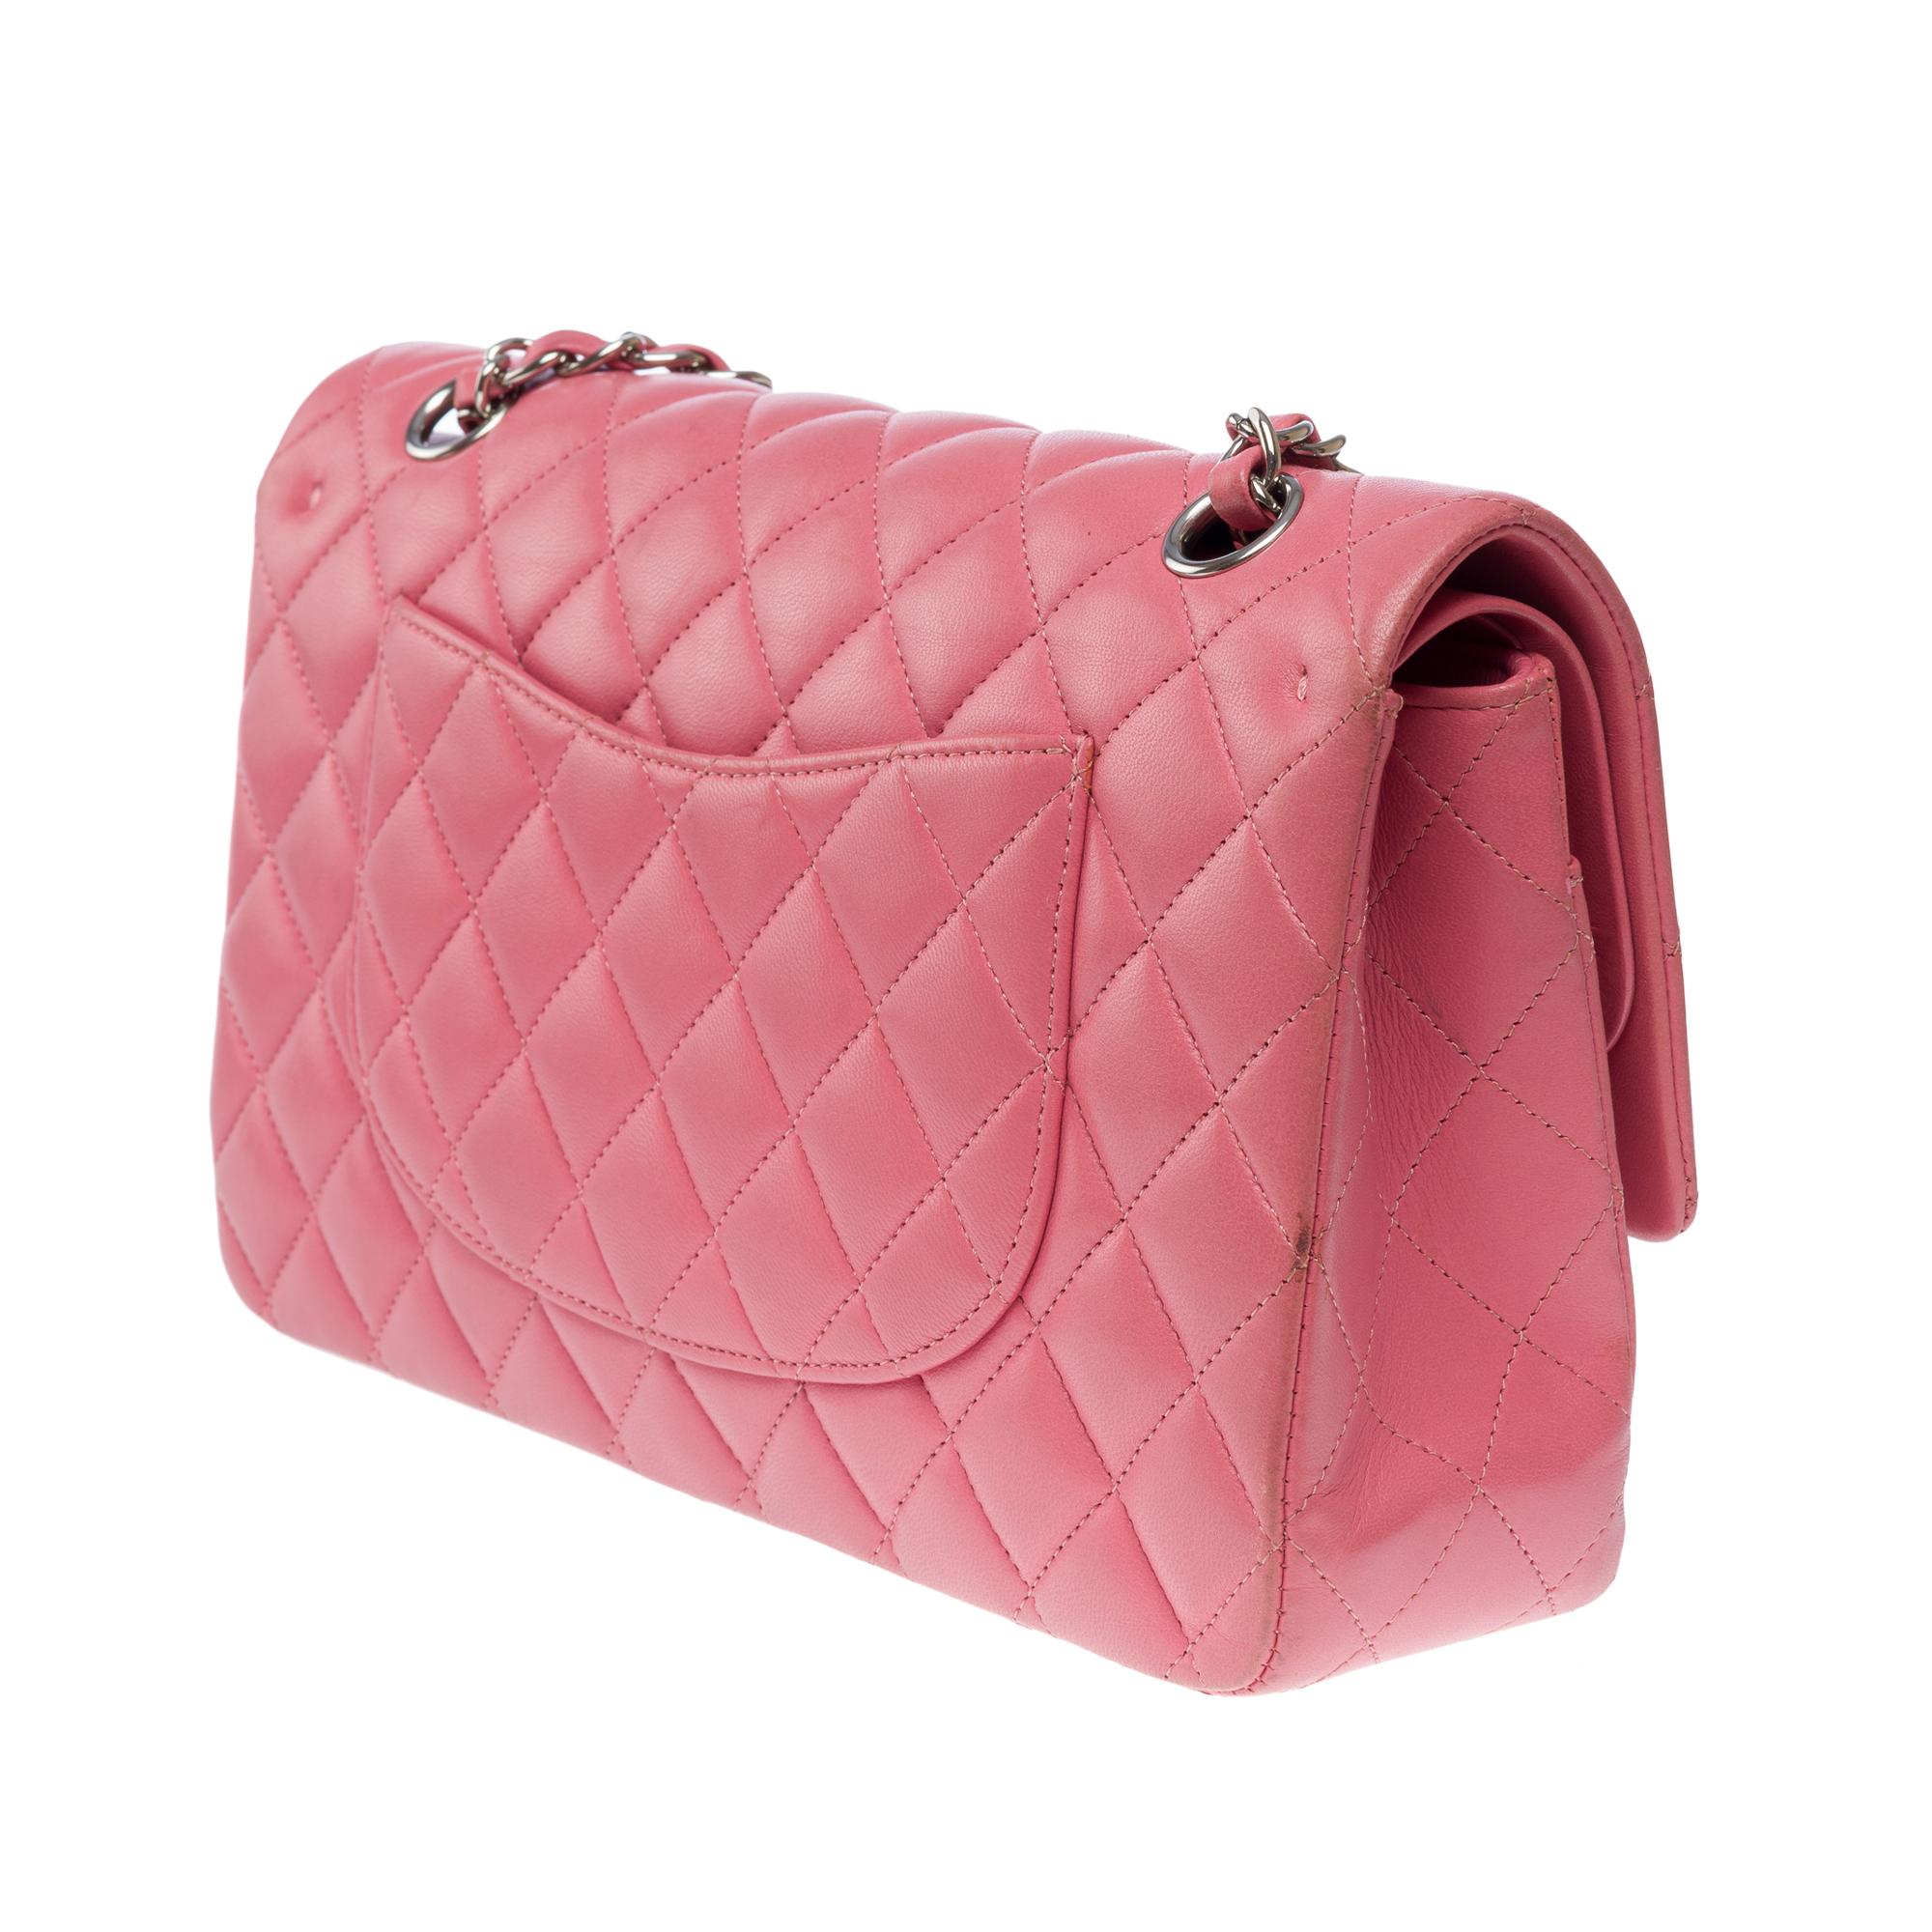 Chanel Timeless double flap shoulder bag in Pink quilted lambskin leather, SHW For Sale 2